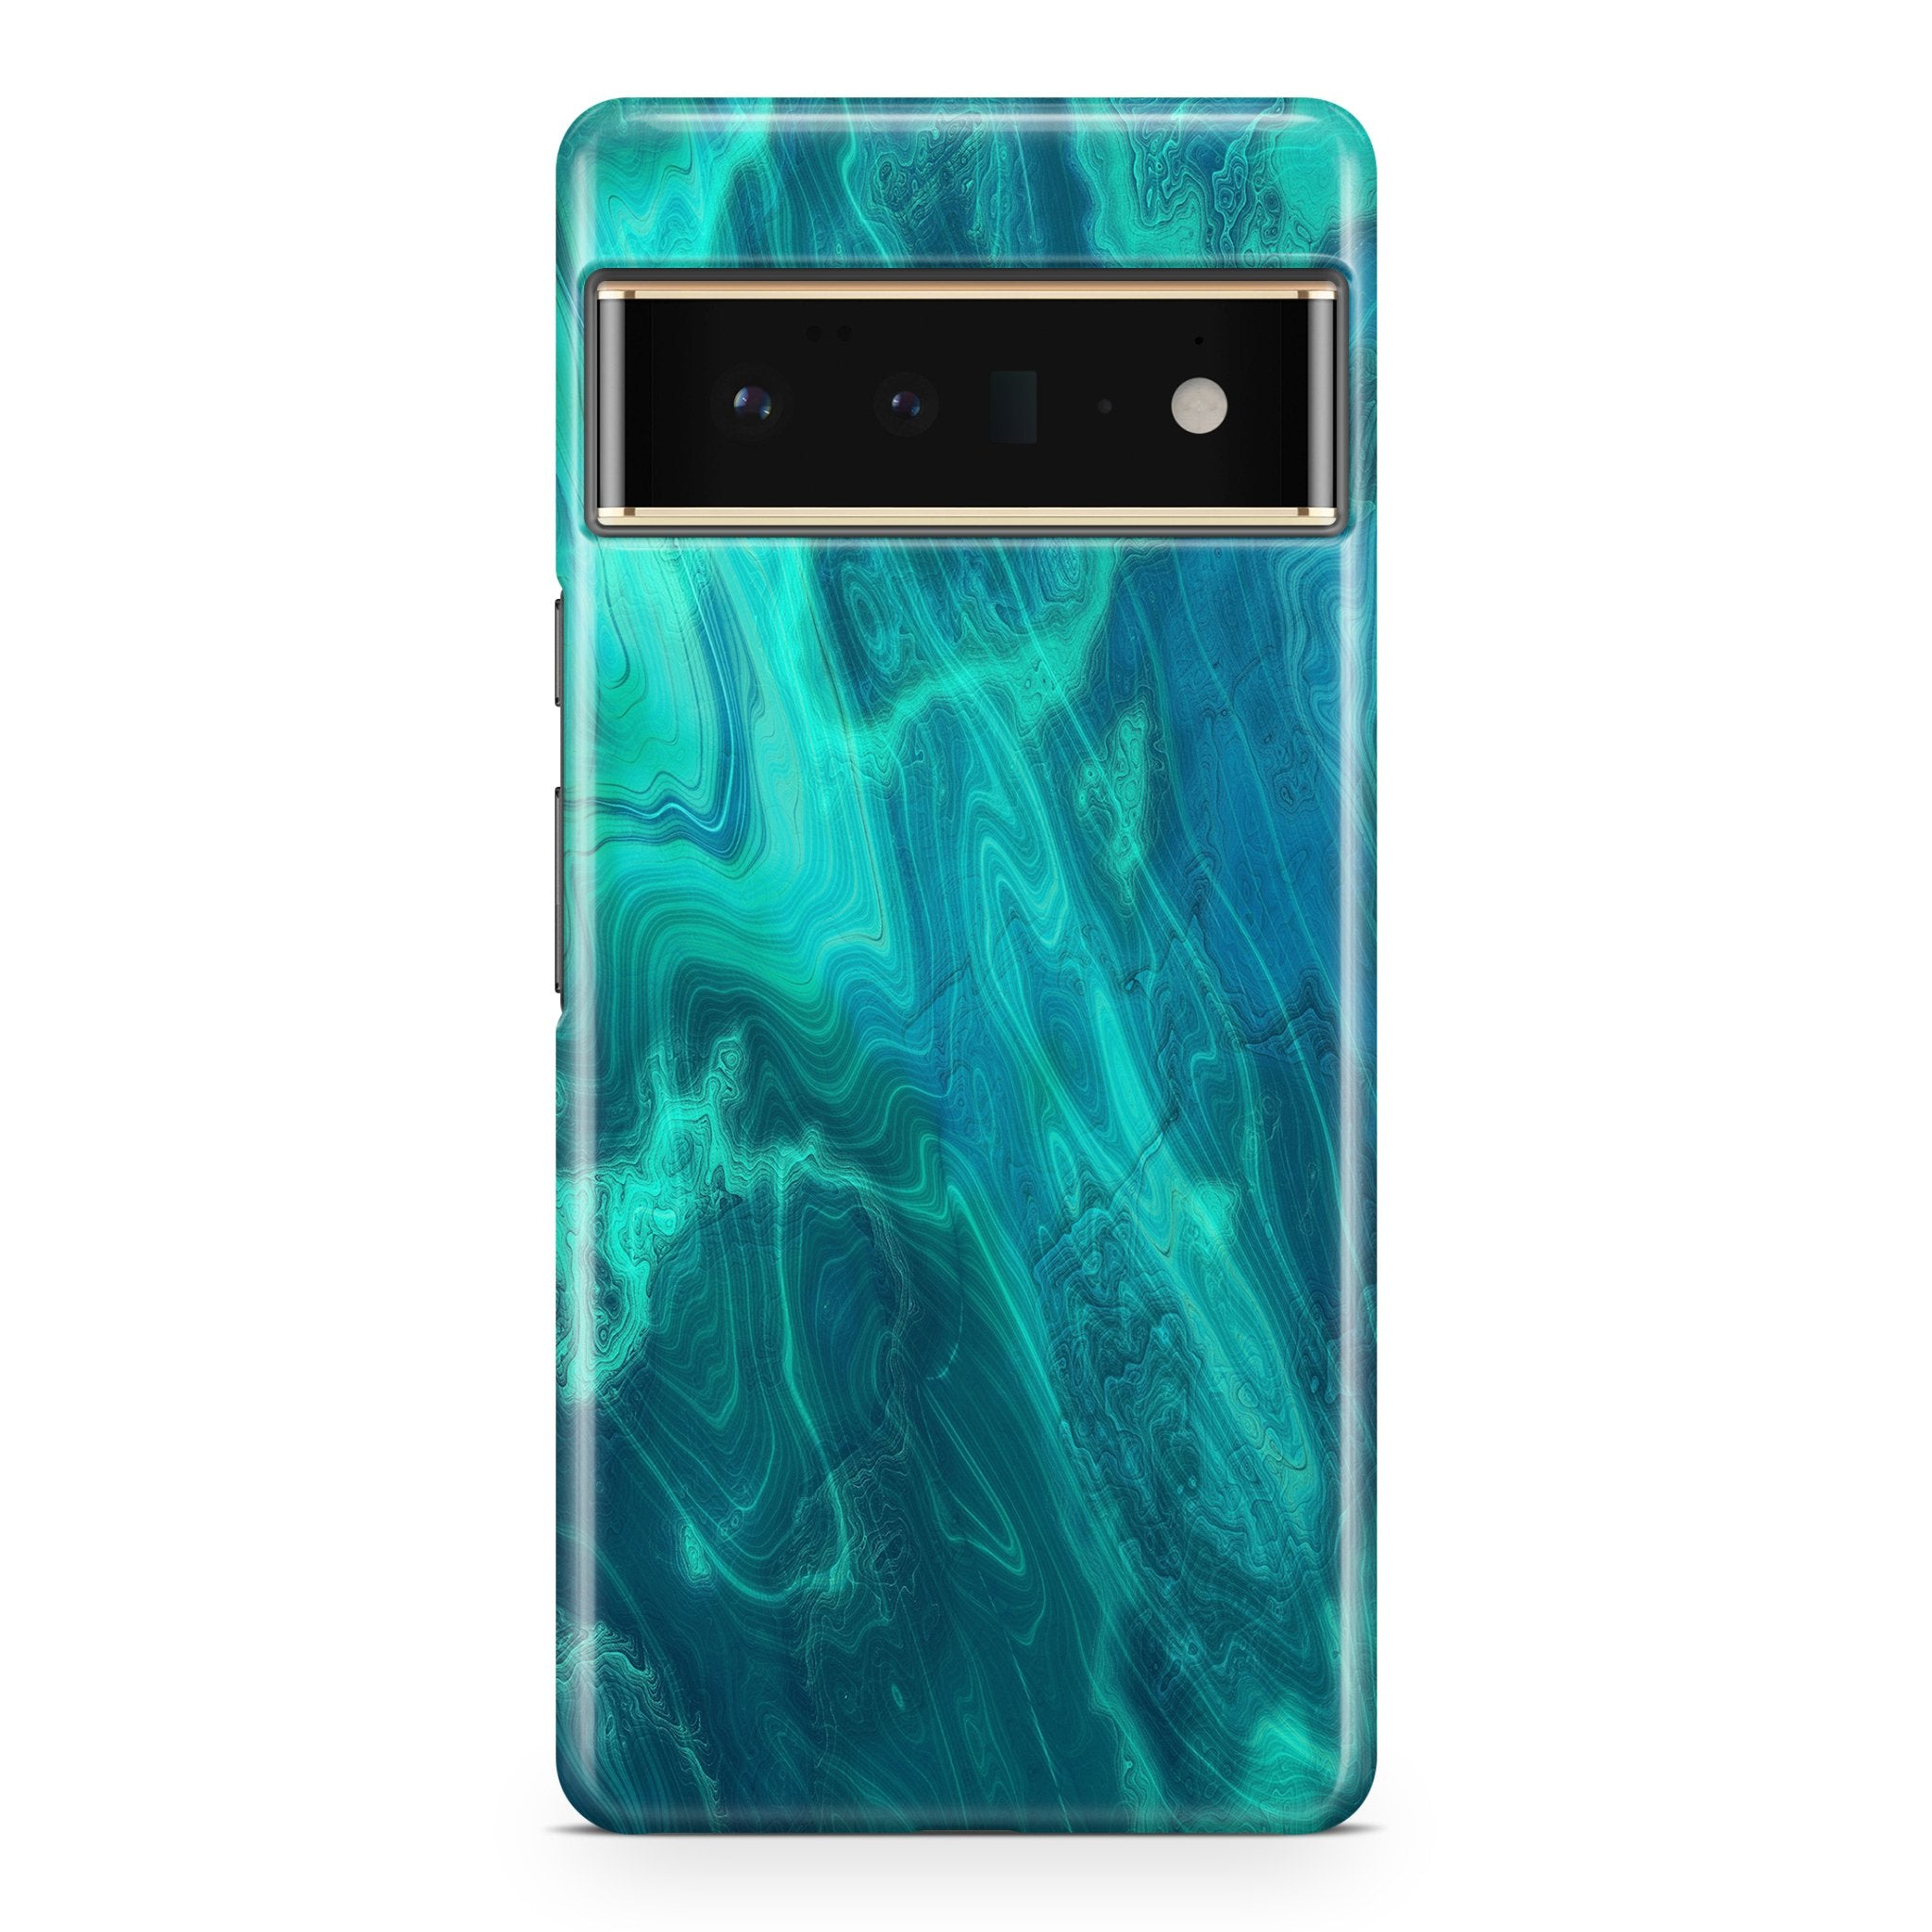 Malachite IV - Google phone case designs by CaseSwagger